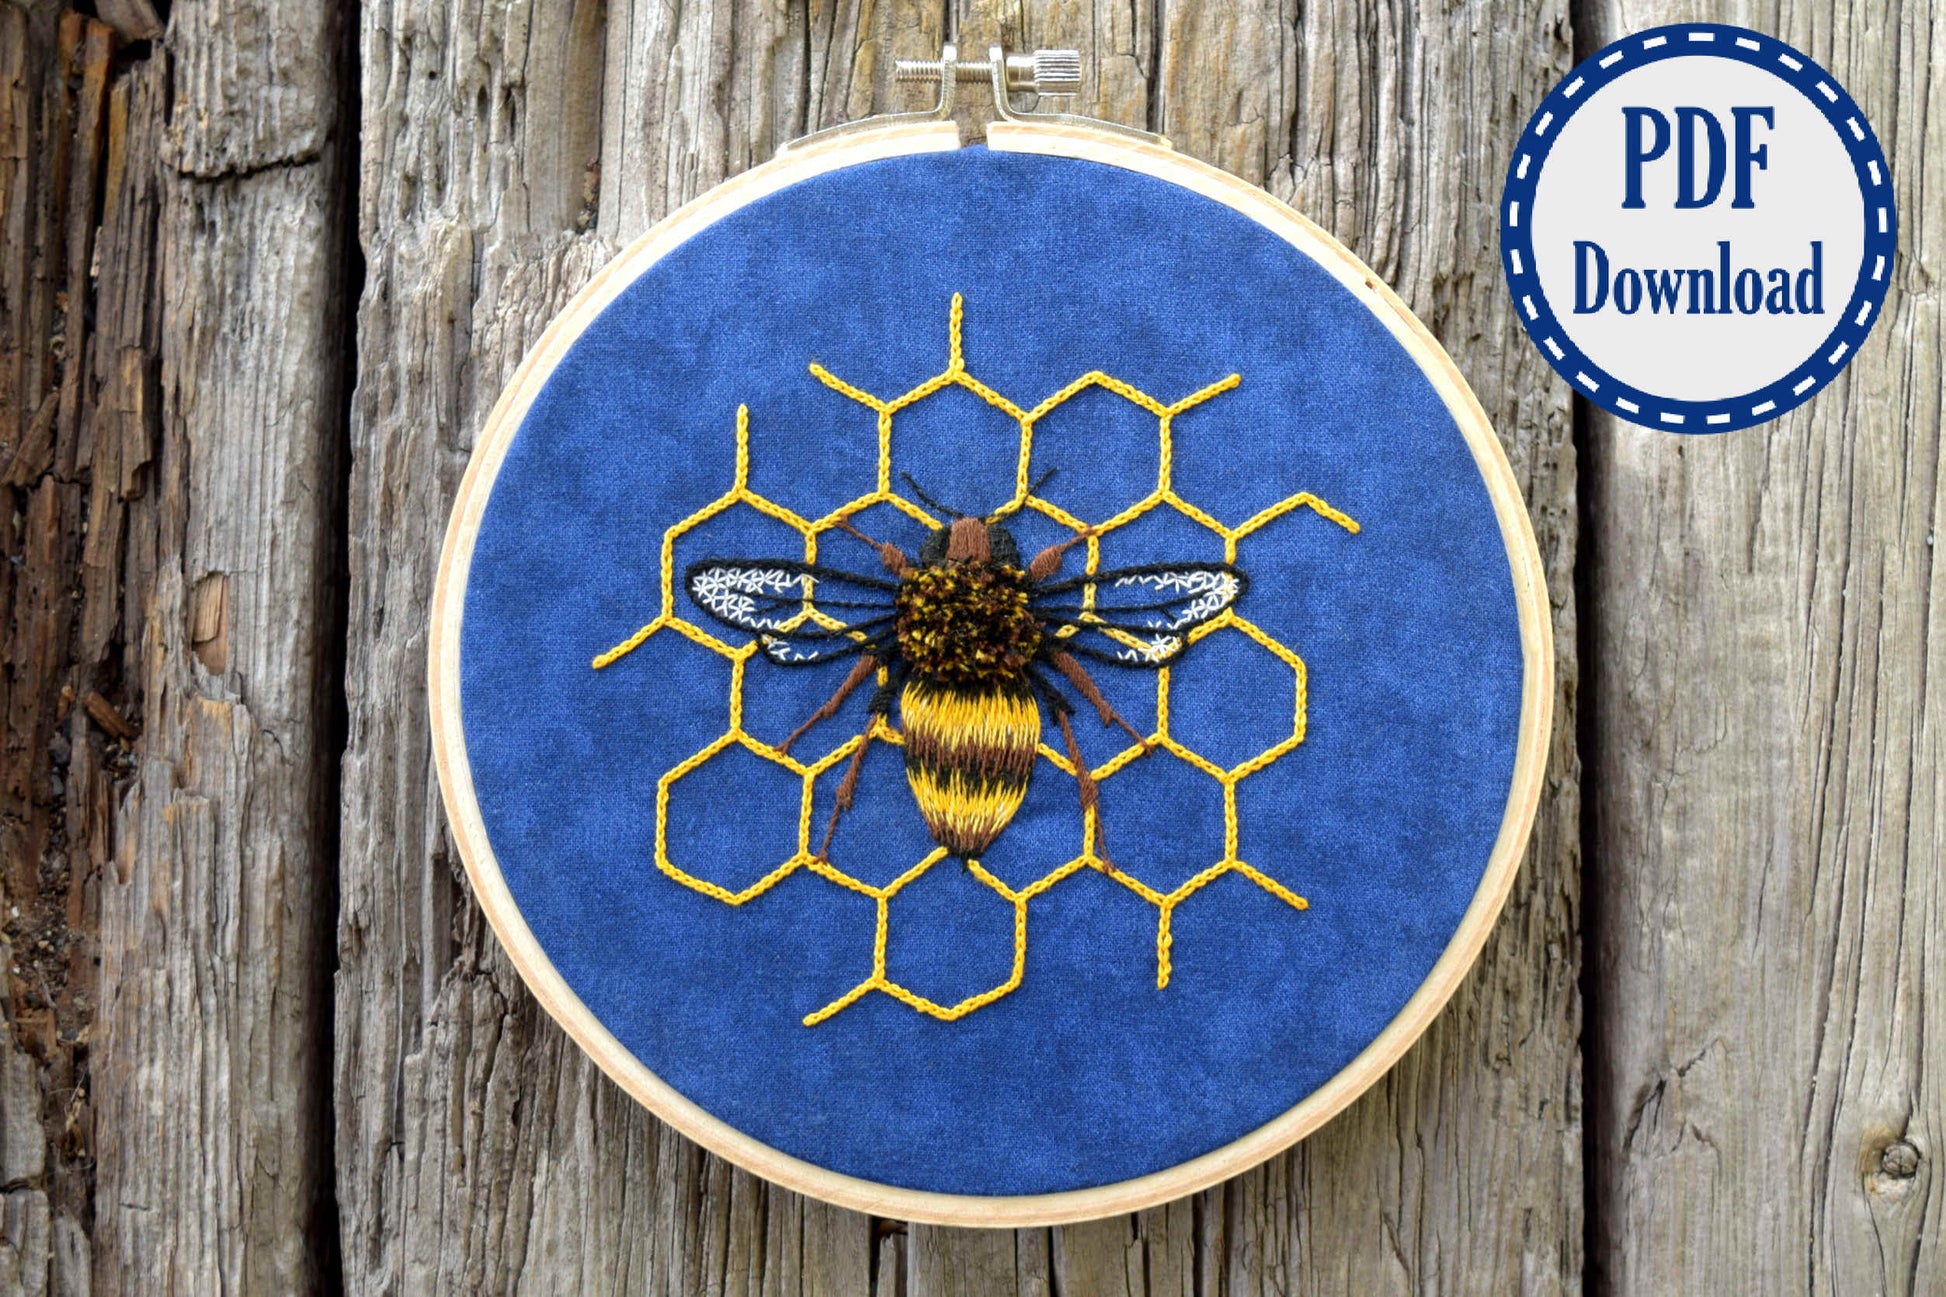 Fuzzy hand embroidered bee in yellow and black on blue background fabric